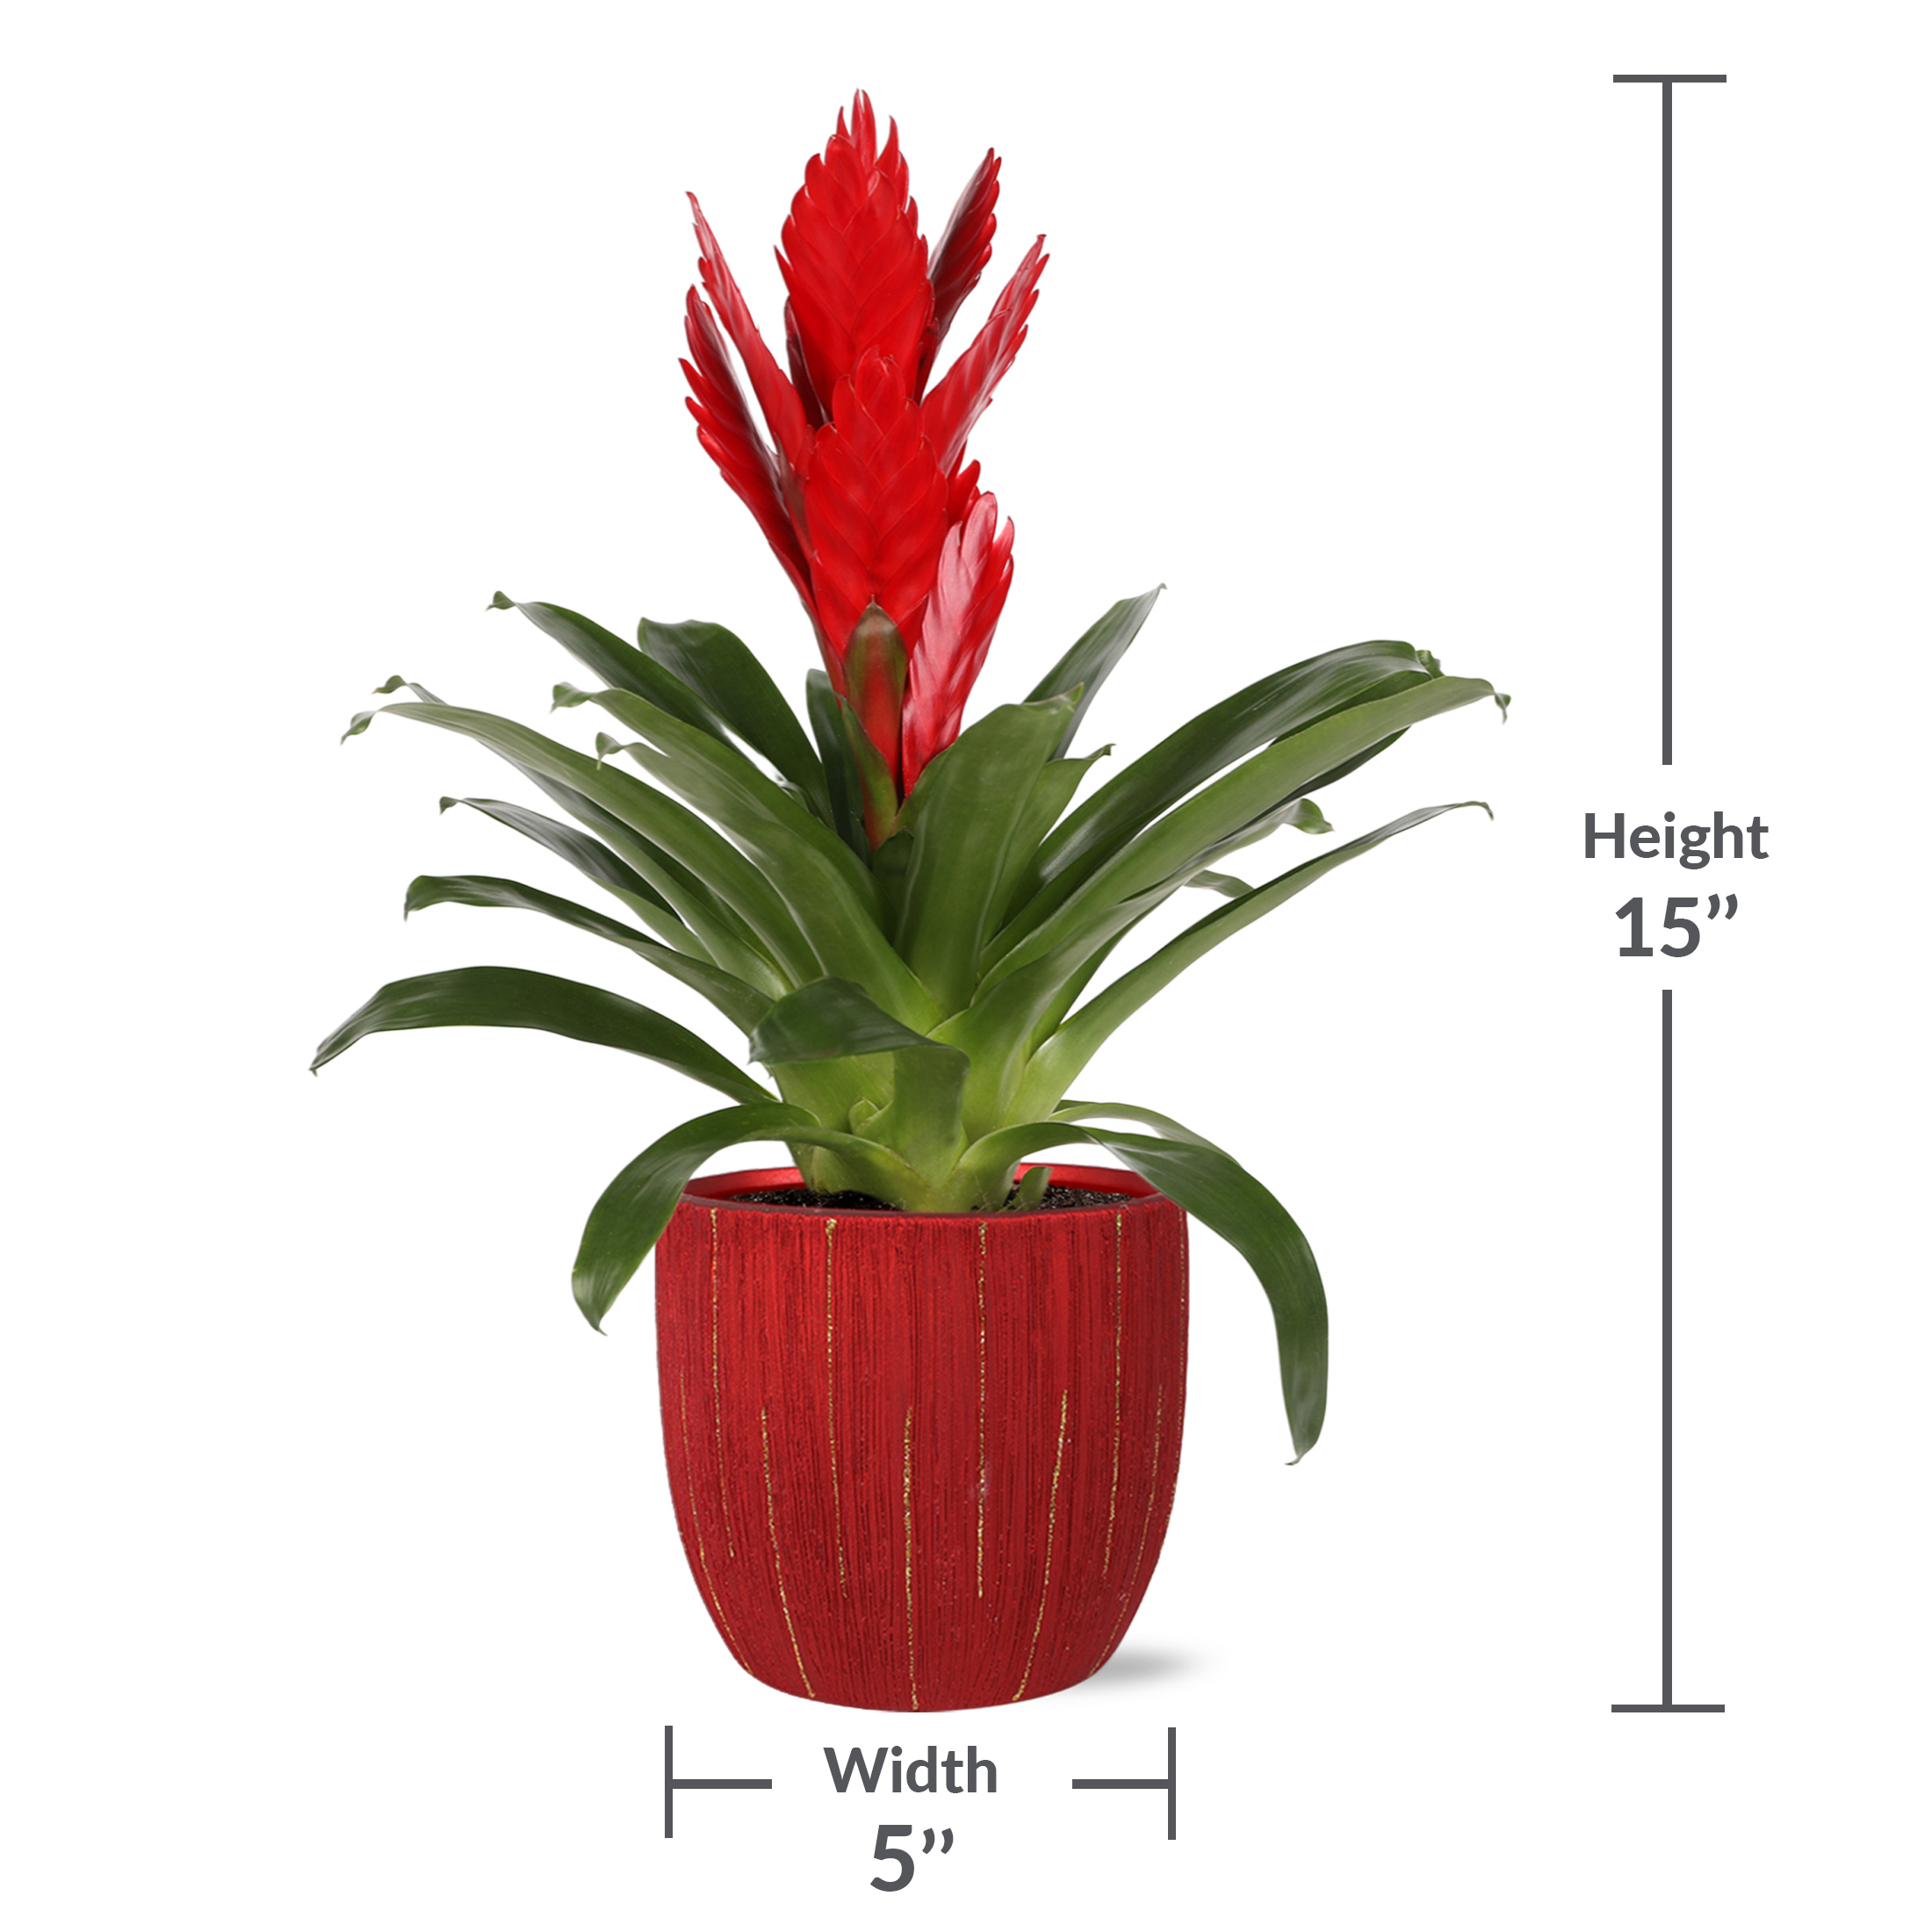 Just Add Ice 15" Tall Red Vriesea Bromeliad in 5" Red Ceramic Pot, Live Plant, Indirect Light, Indoor House Plant - image 4 of 5